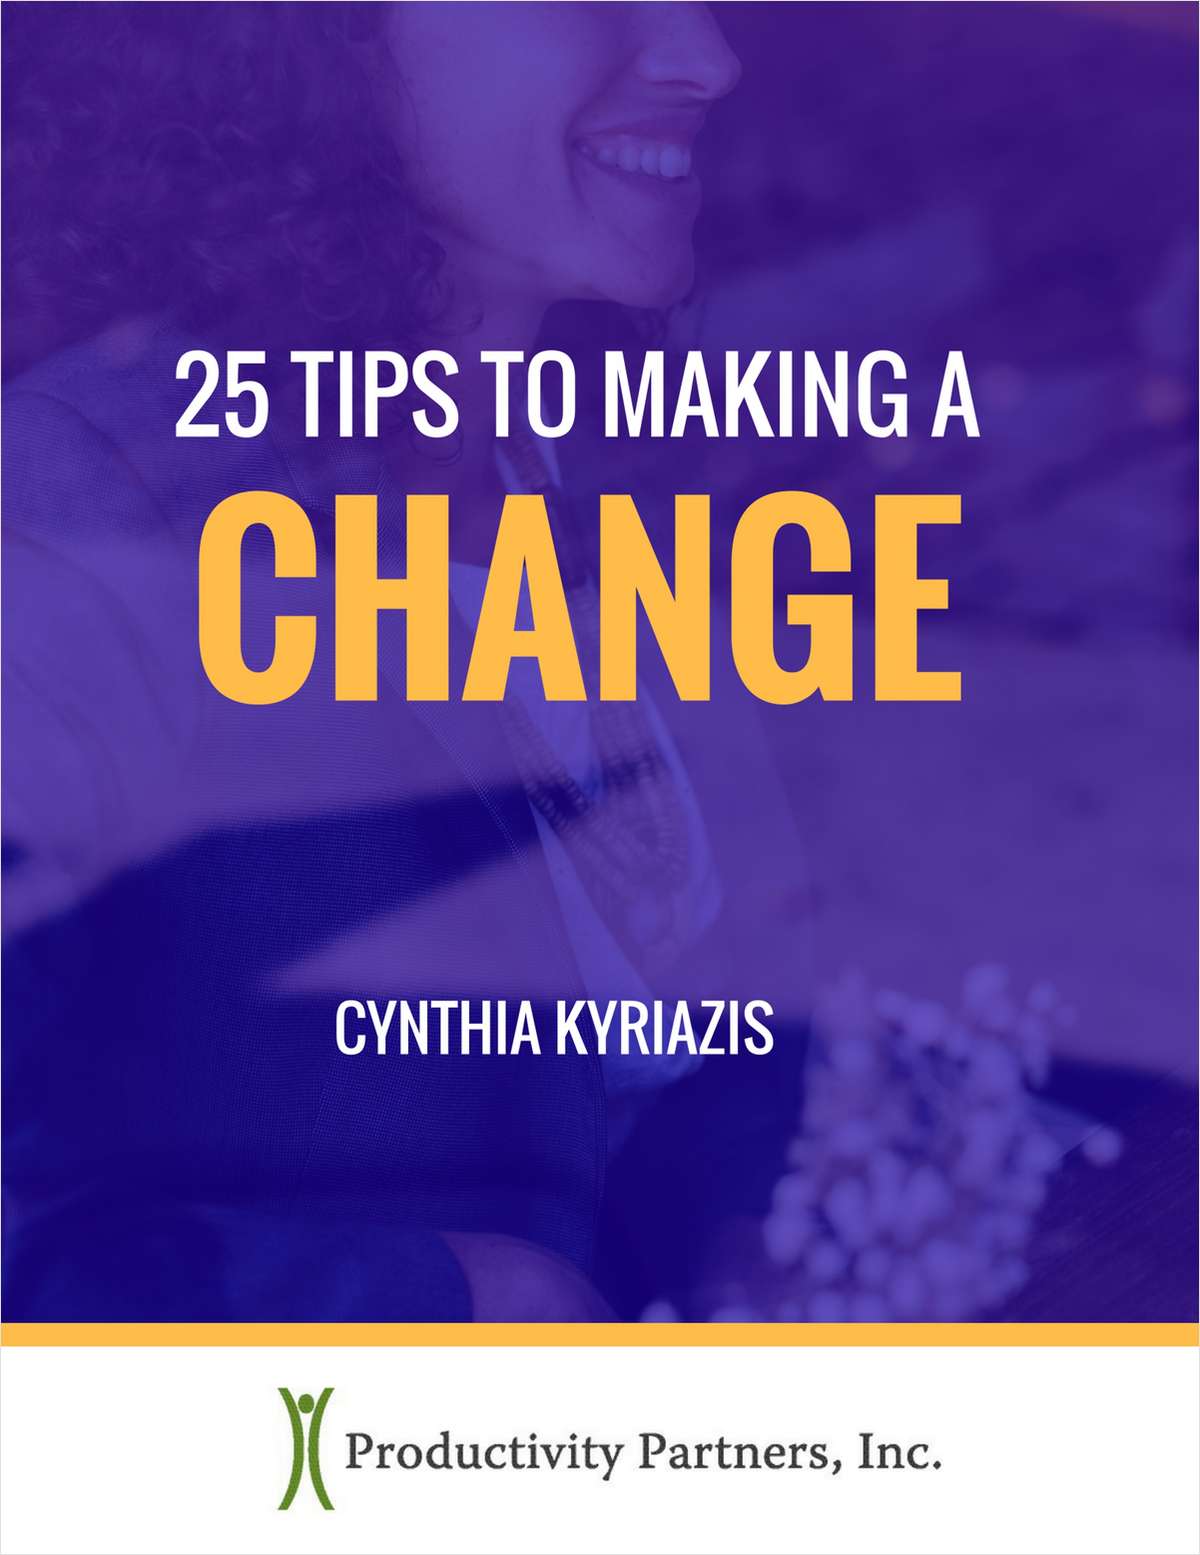 25 Tips to Making a Change